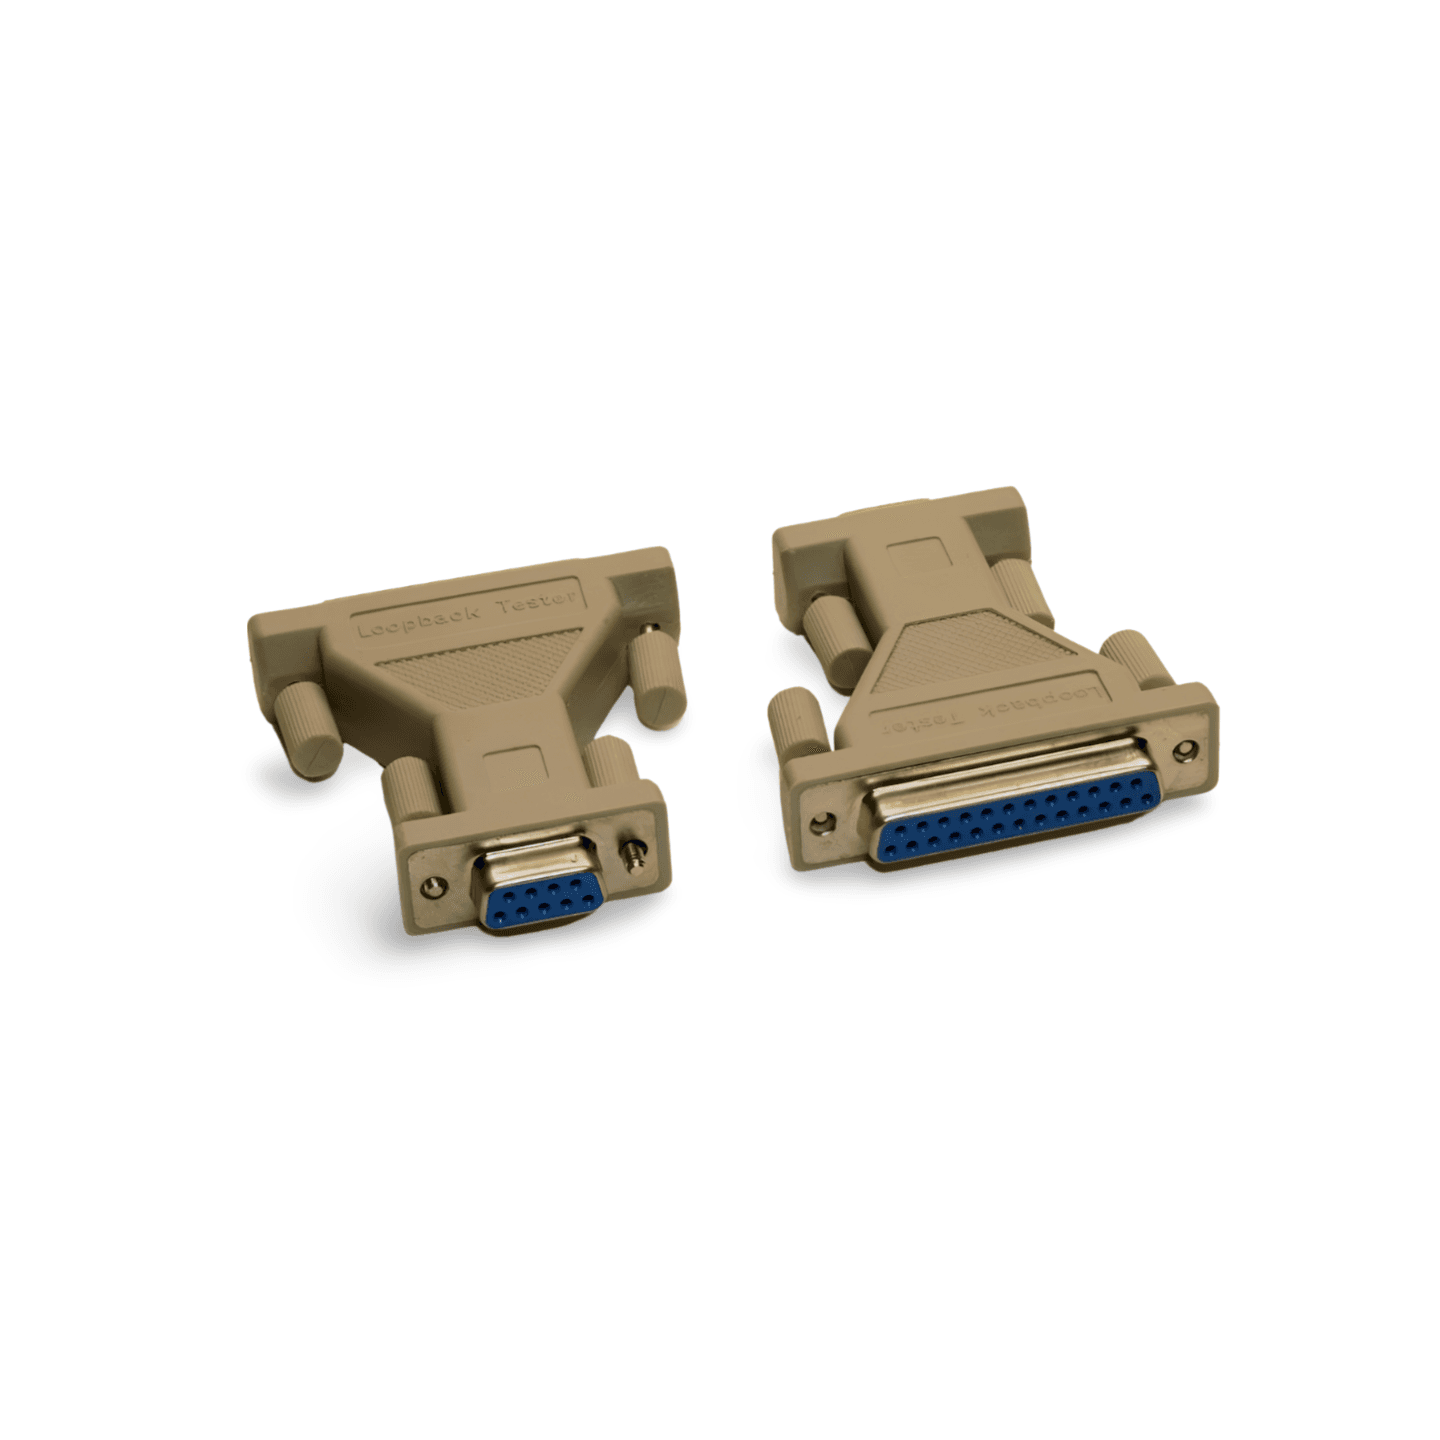 2in Loopback Adapter Tester Plug Serial DB25 Female to DB9 Female RS232 beige